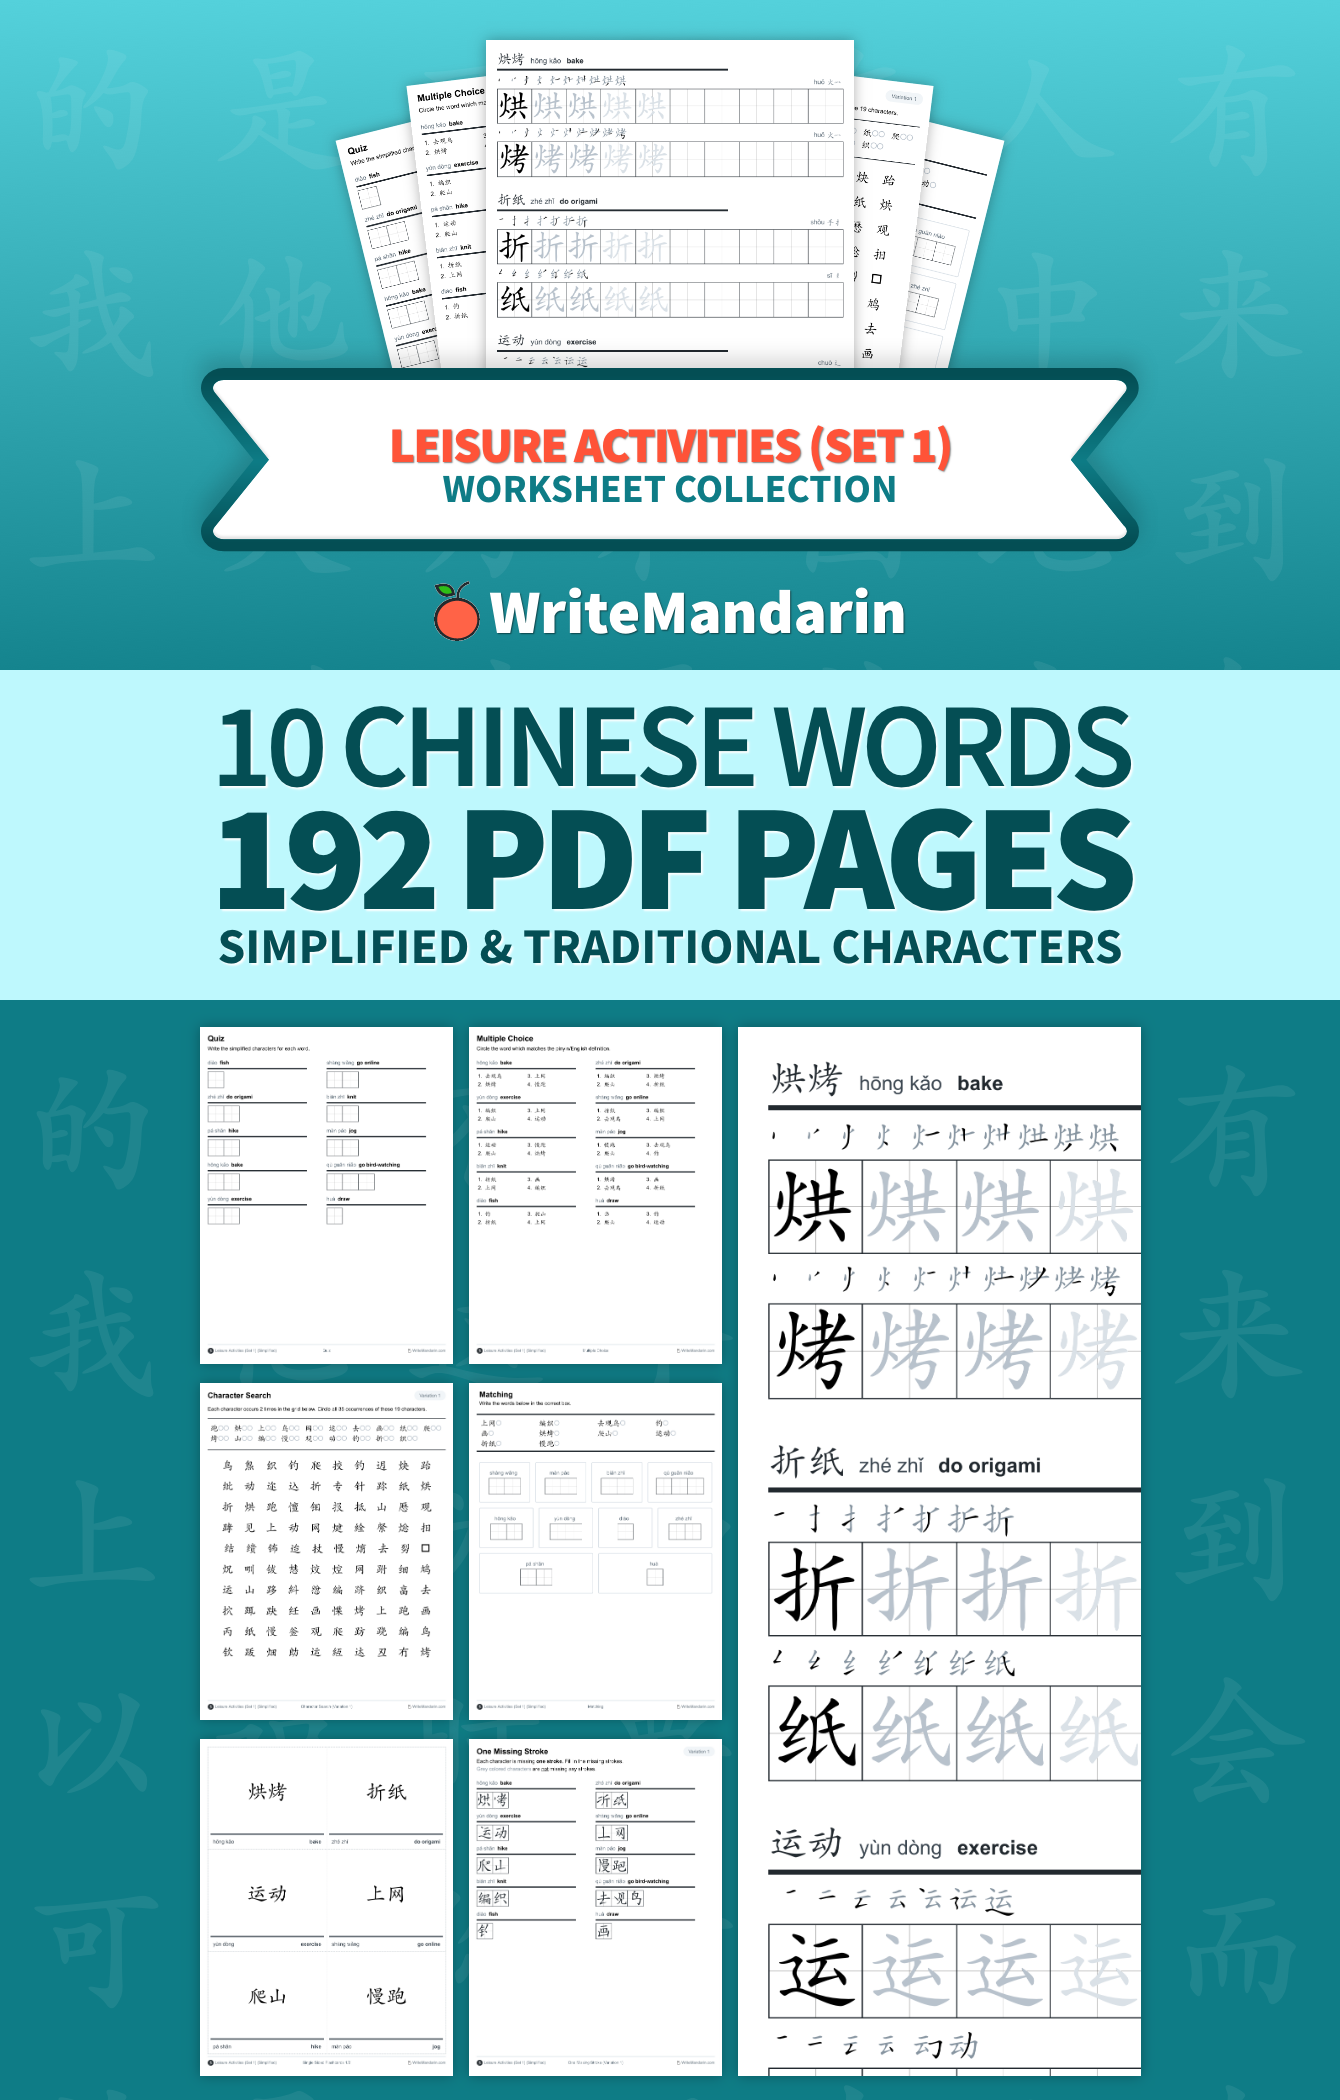 Preview image of Leisure Activities (Set 1) worksheet collection